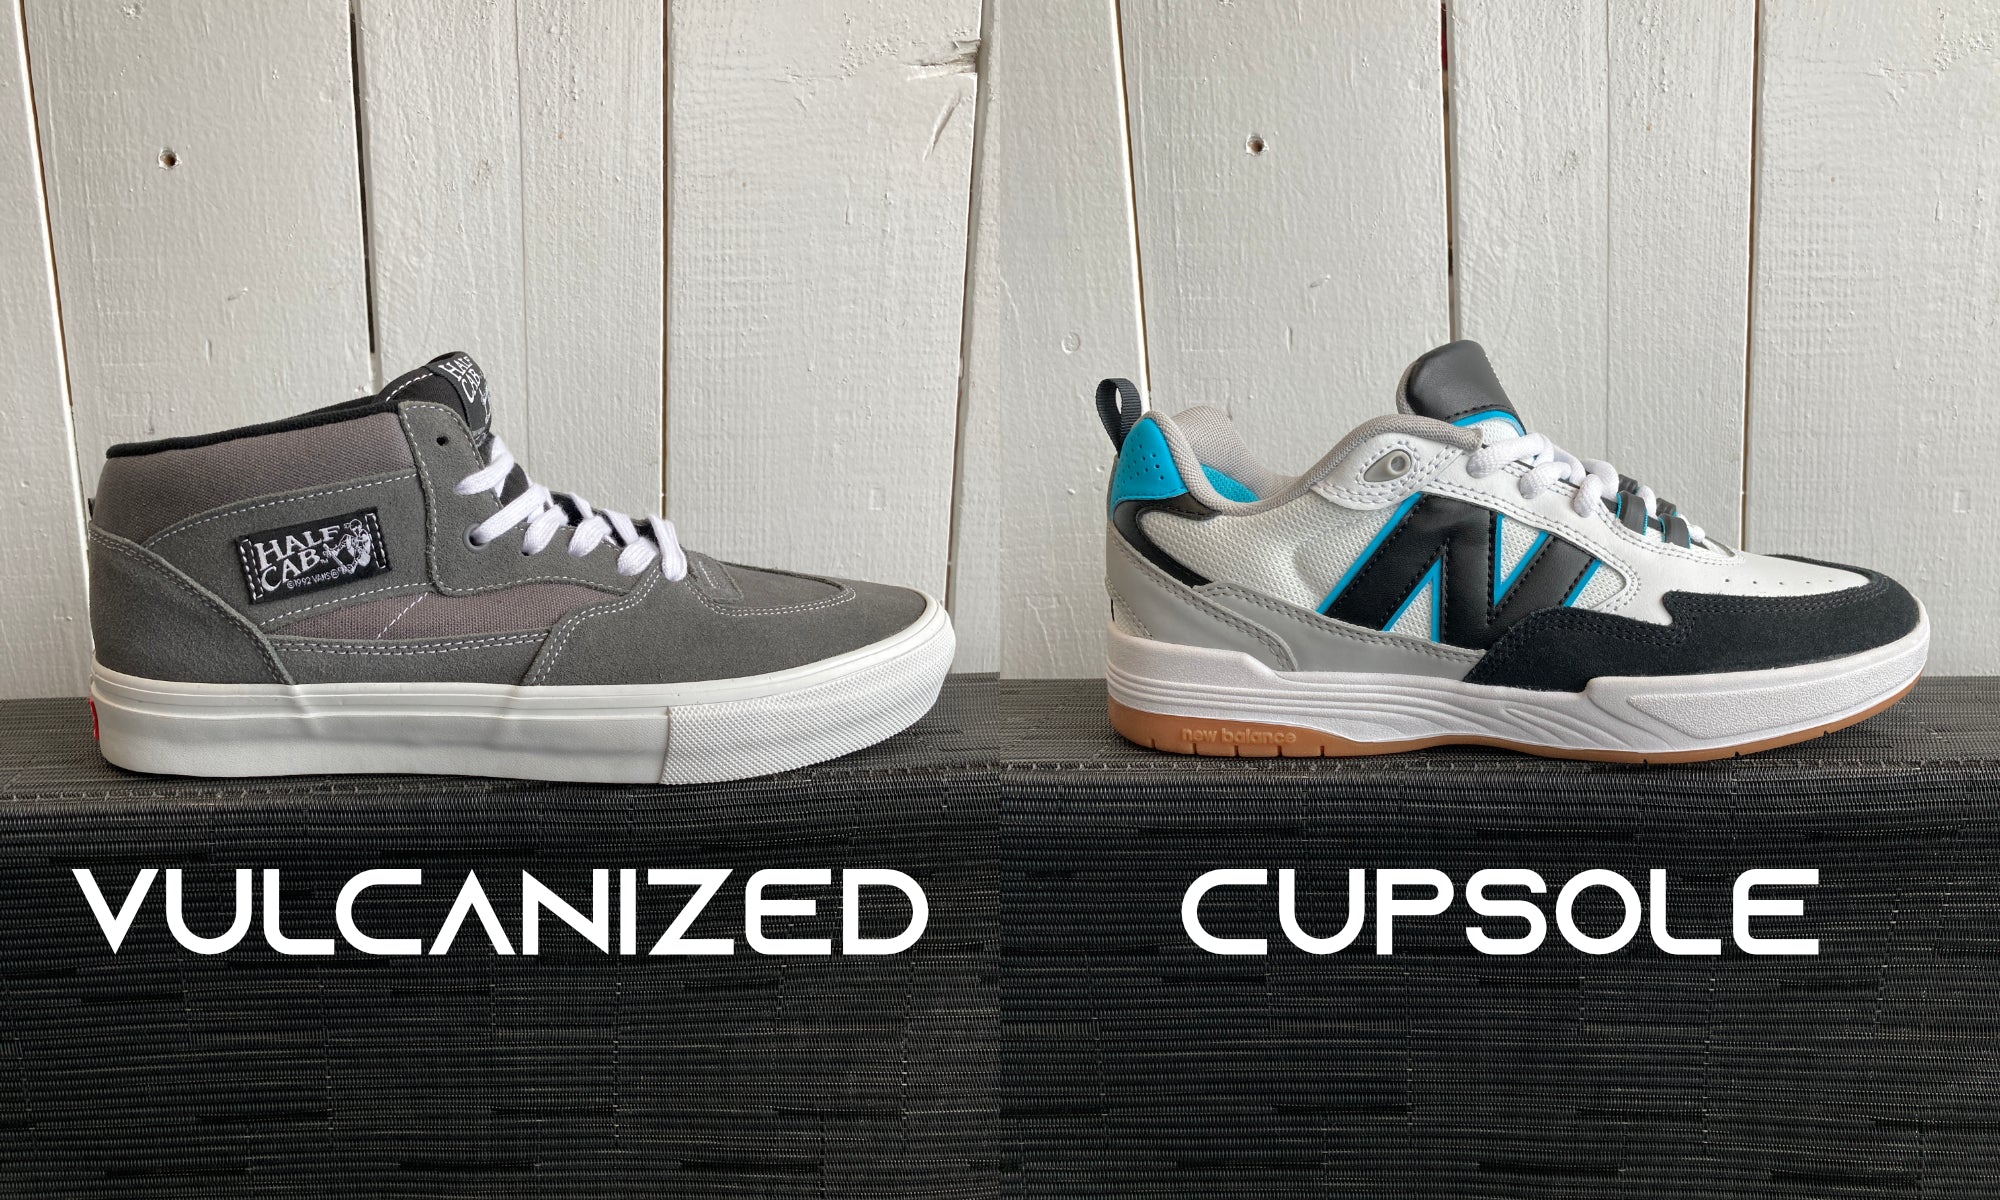 Versus Pro Shop blog on the differences between vulcanized and cupsole shoes.